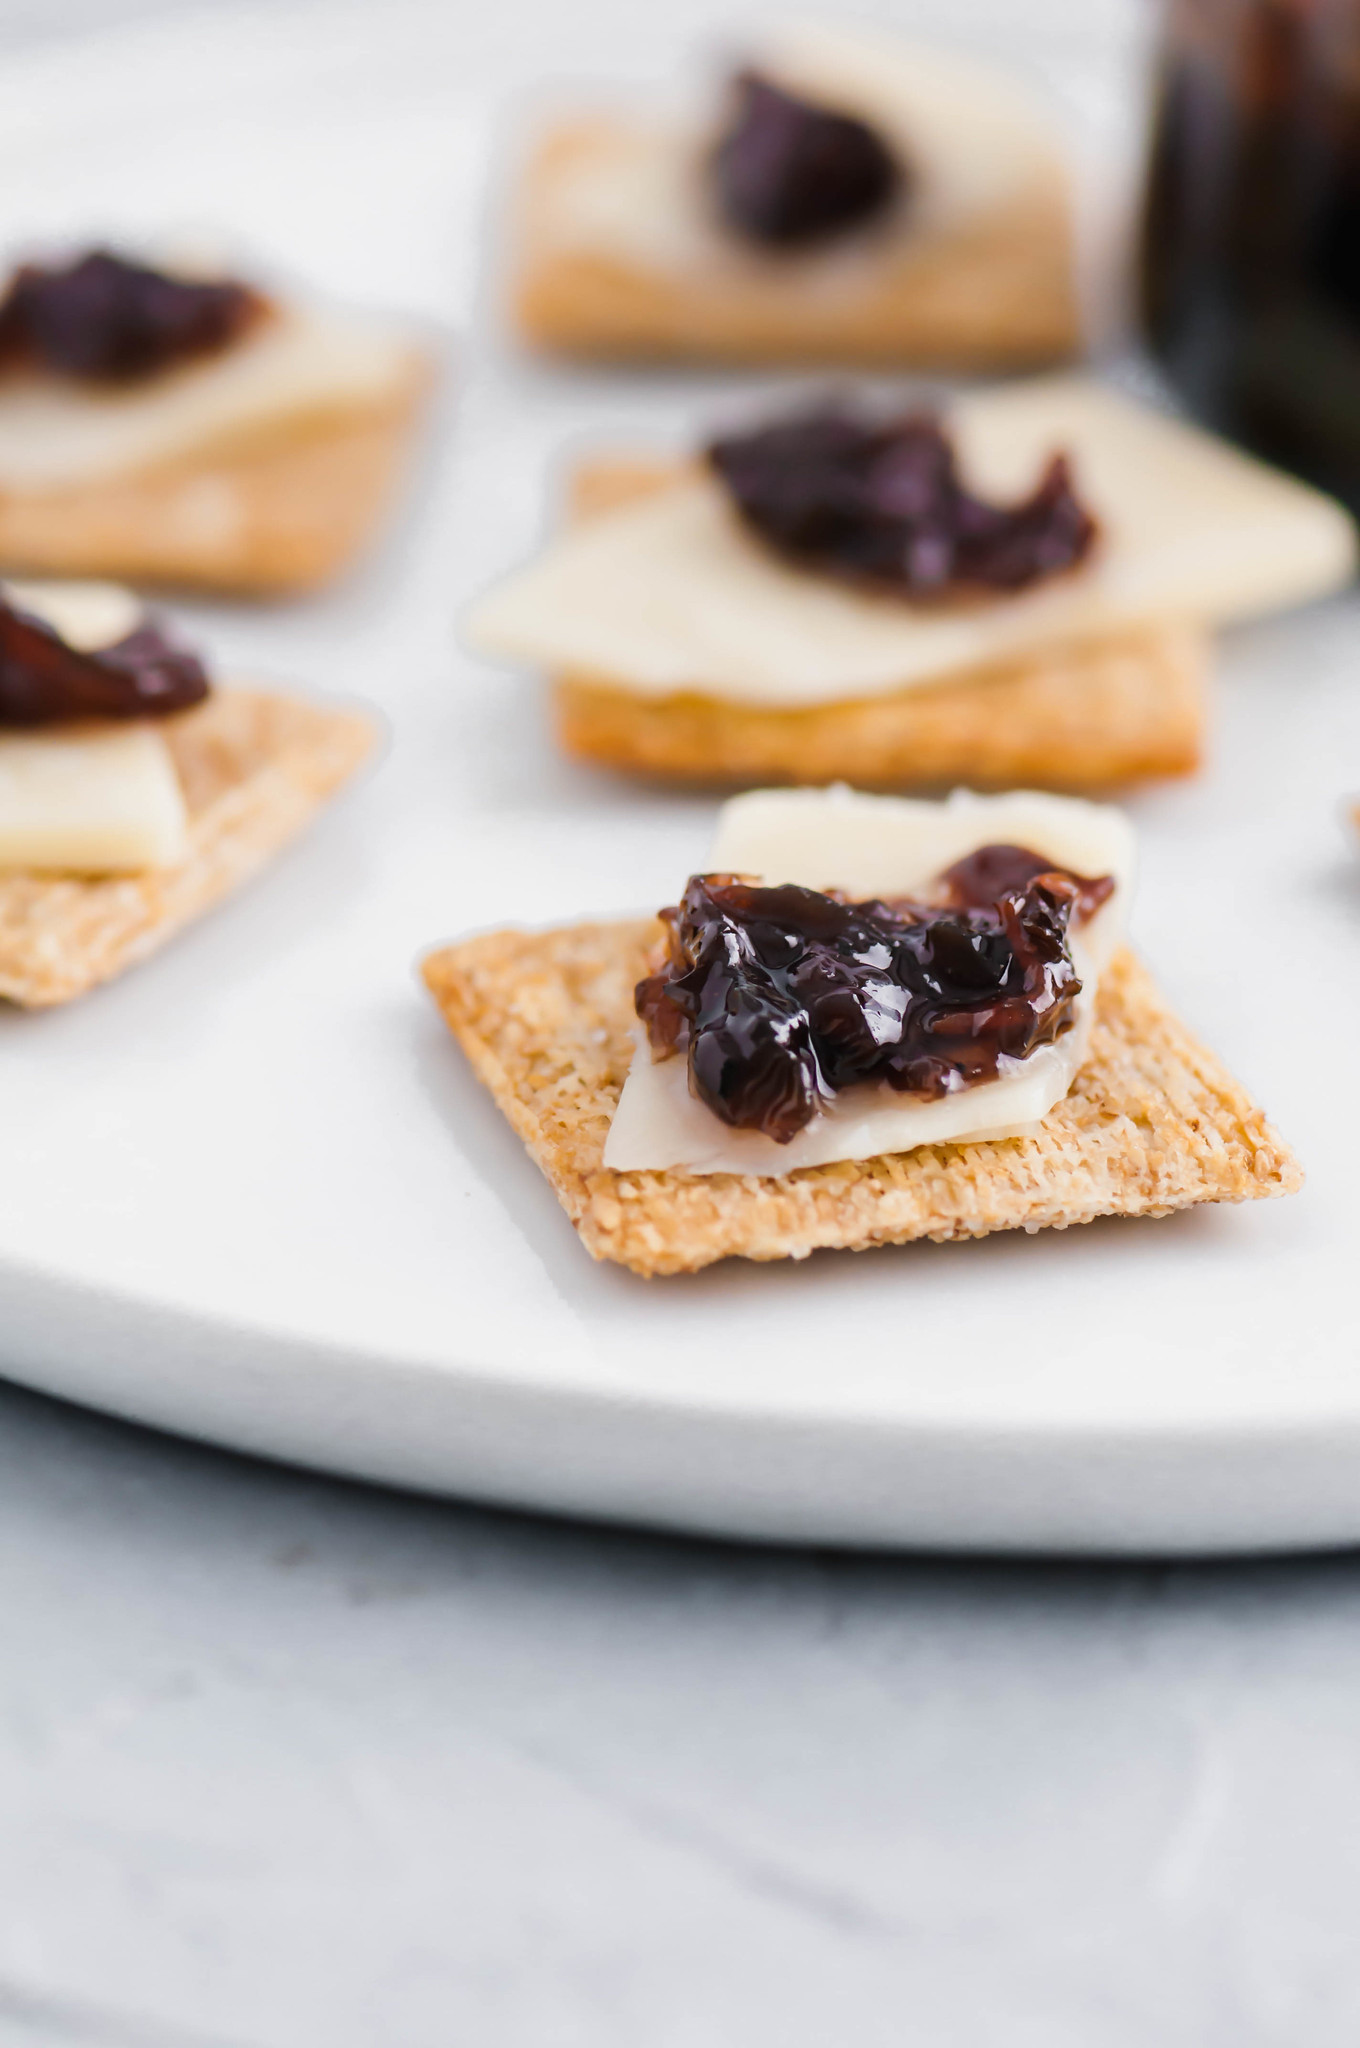 Bacon Onion Jam is a delicious, sweet and savory condiment that is going to blow your mind. Smoky bacon, red onions, sugar and vinegar are cooked down to create a thick, caramelized jam that is delicious on crackers, sandwiches, brie and more. 